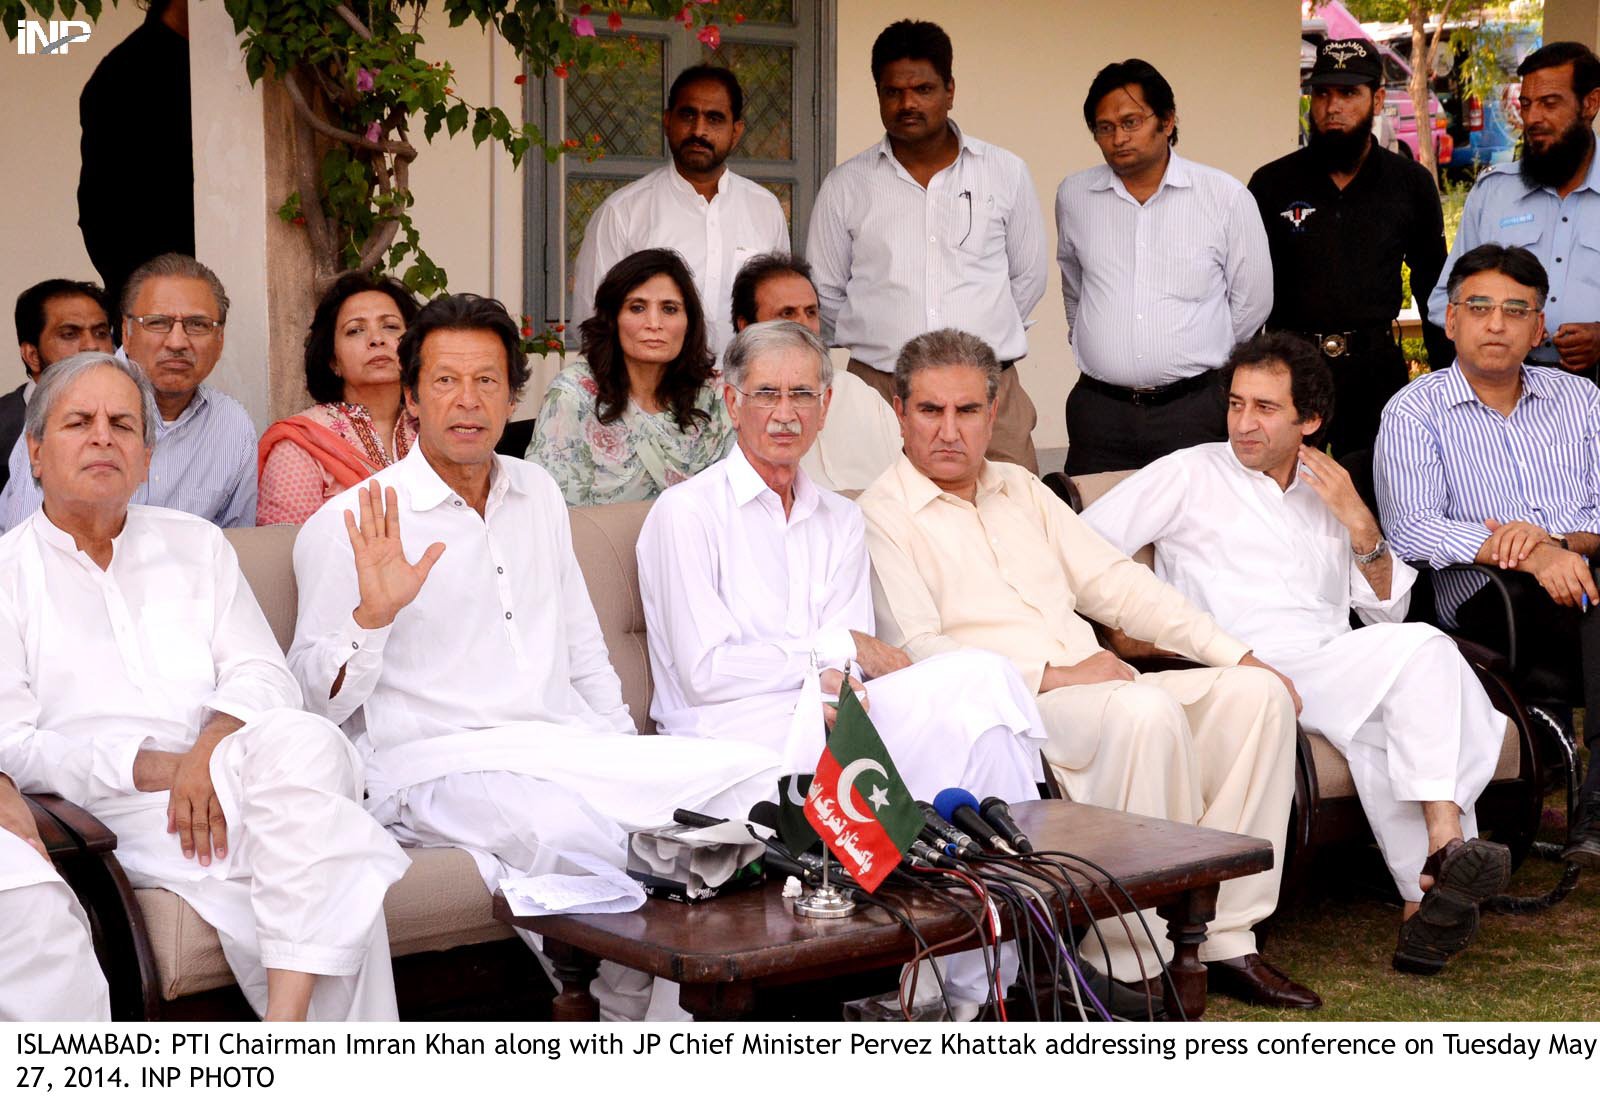 pti chairperson imran khan along with party leaders photo inp